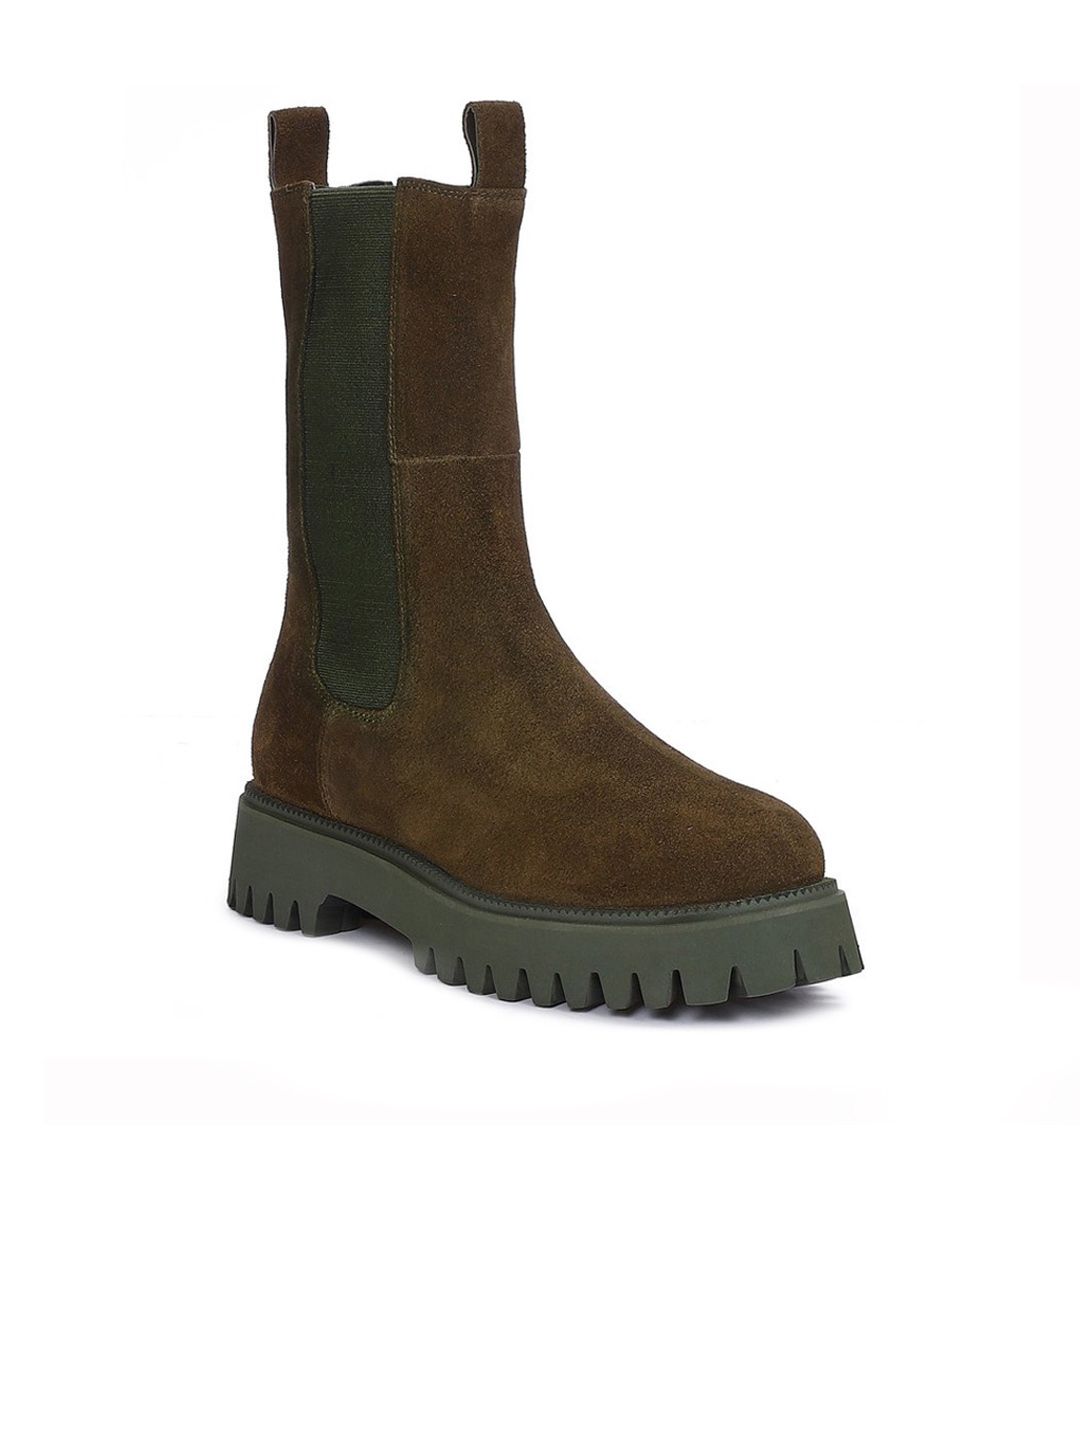 Saint G Green Bosco Suede Leather Boots Price in India